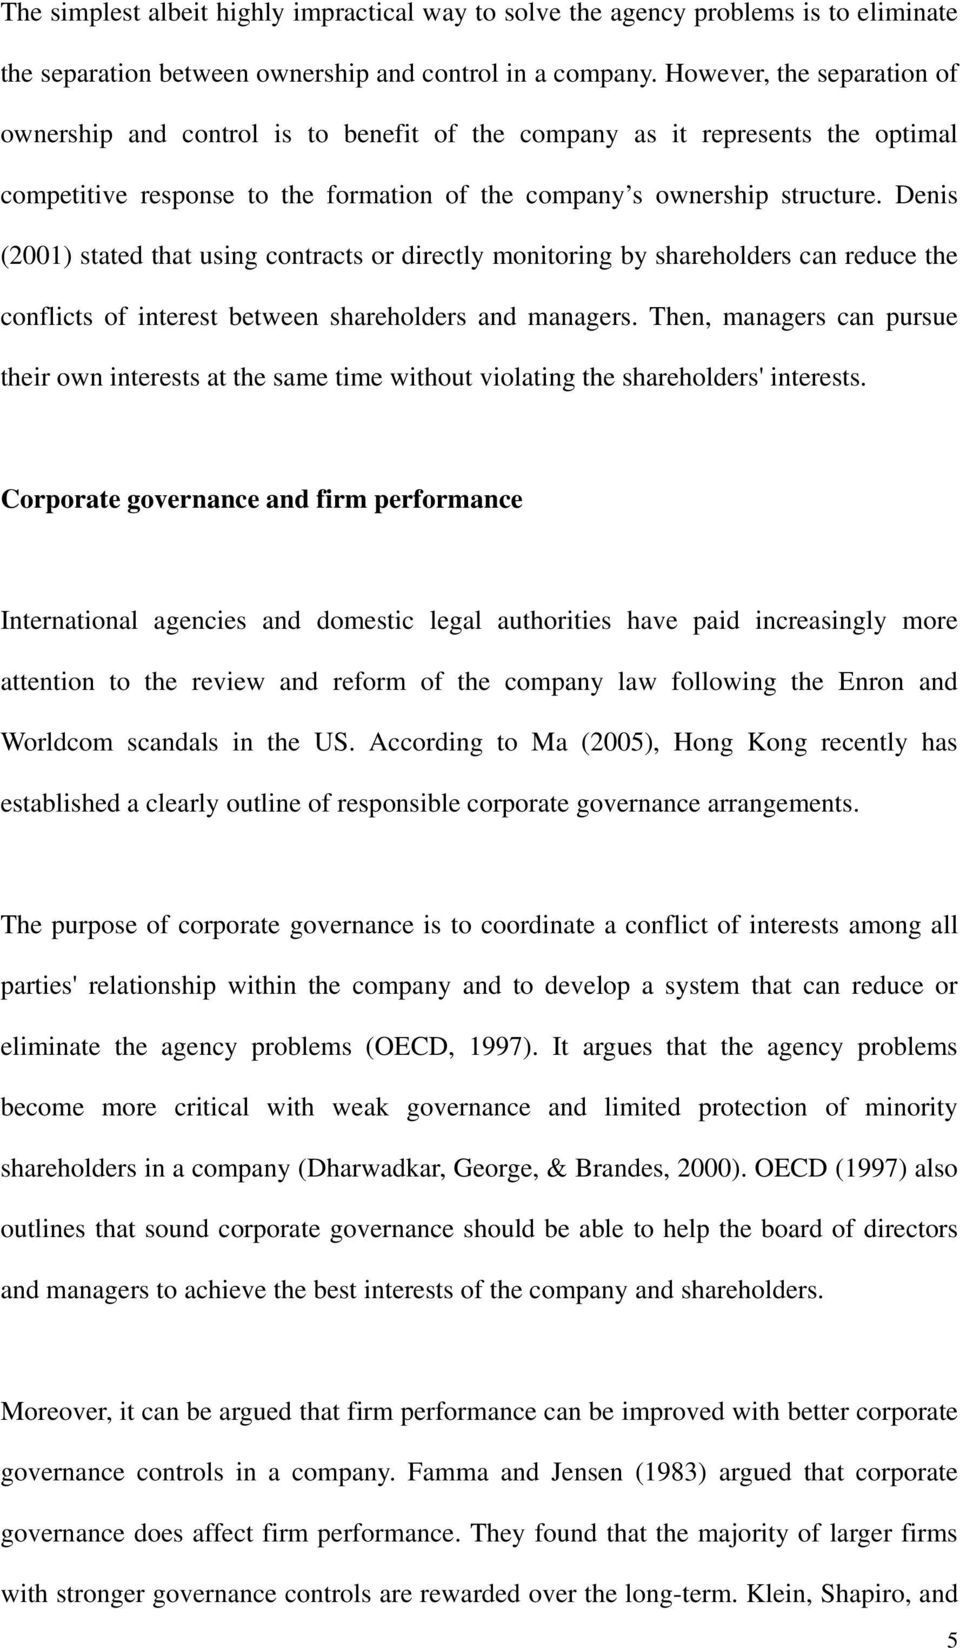 Denis (2001) stated that using contracts or directly monitoring by shareholders can reduce the conflicts of interest between shareholders and managers.